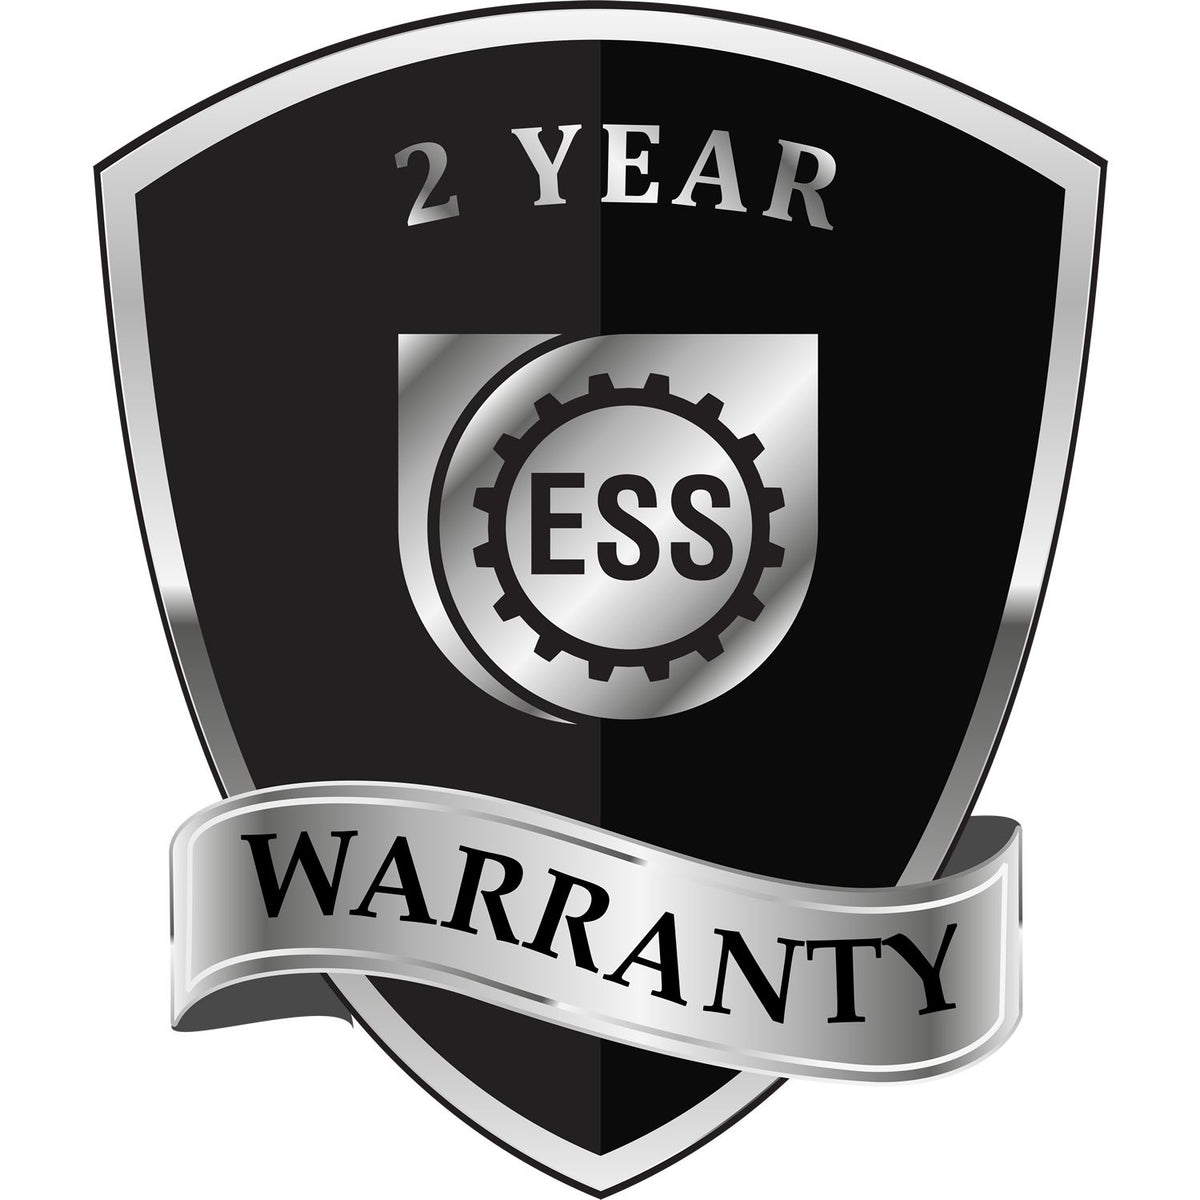 A black and silver badge or emblem showing warranty information for the State of Delaware Extended Long Reach Geologist Seal